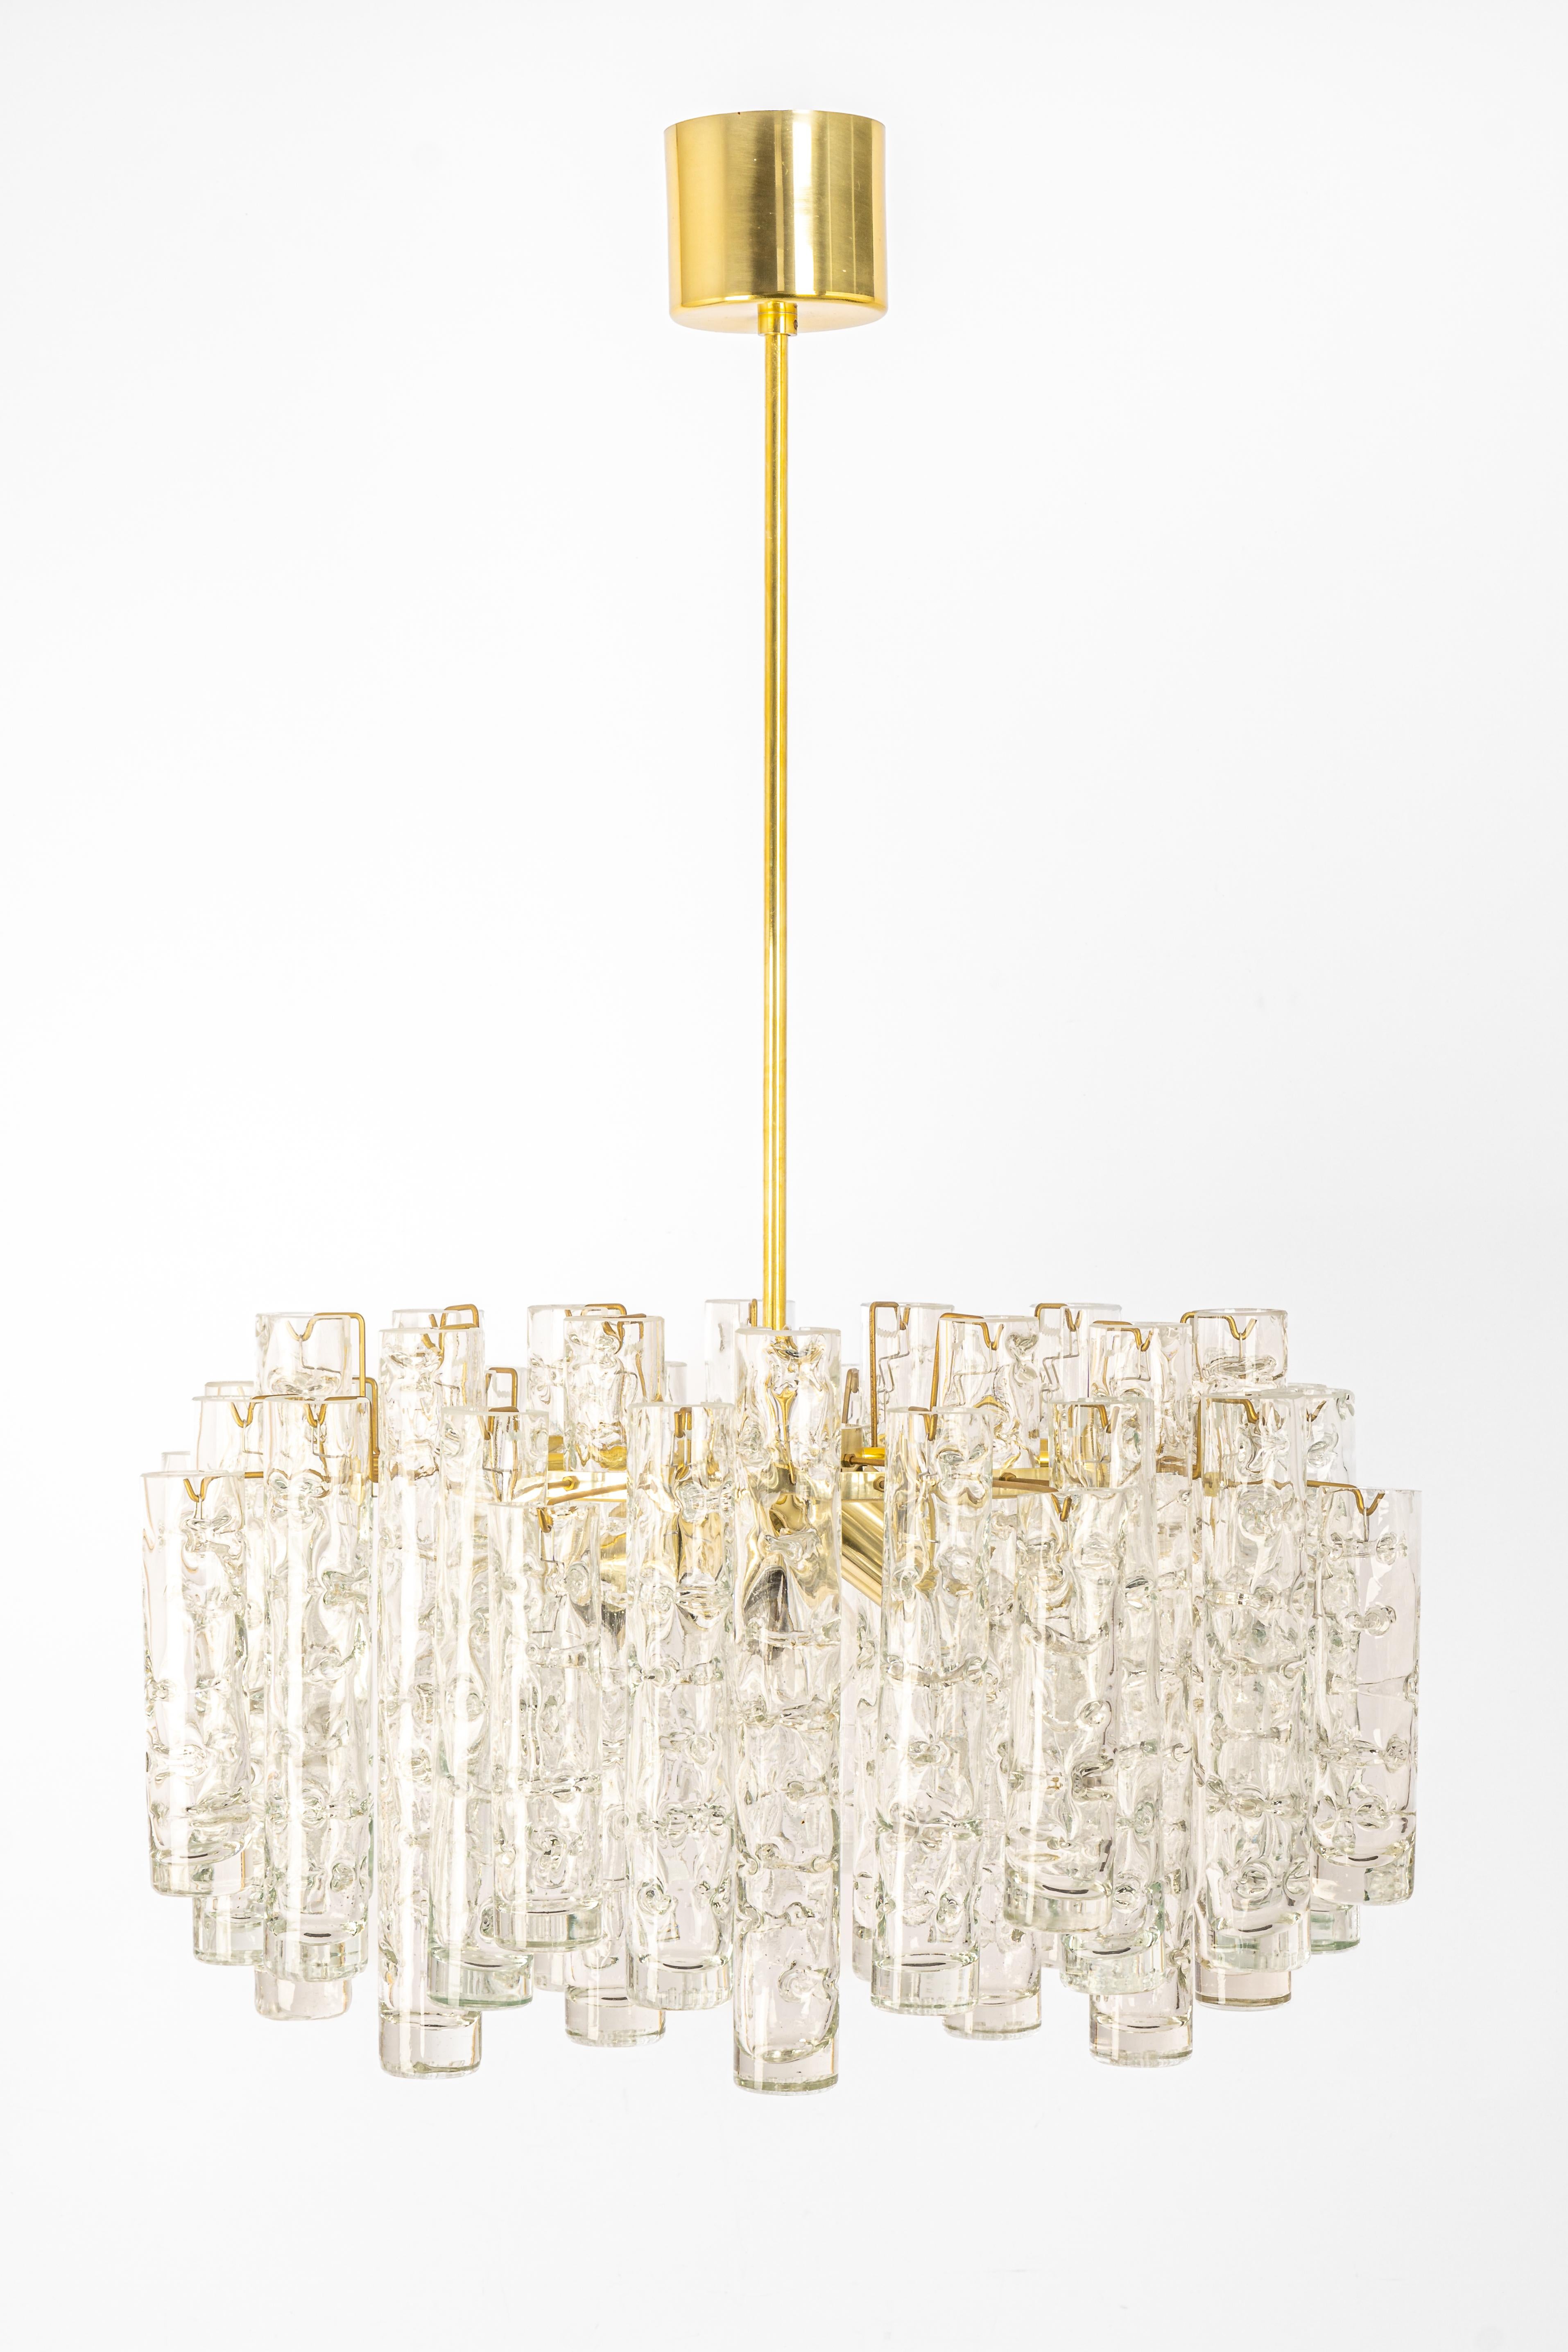 Fantastic mid-century chandelier by Doria, Germany, manufactured circa 1960-1969. A lot of Murano glass cylinders suspended from the fixture.

Heavy quality and in very good condition. Cleaned, well-wired, and ready to use.

The fixture requires 4 x